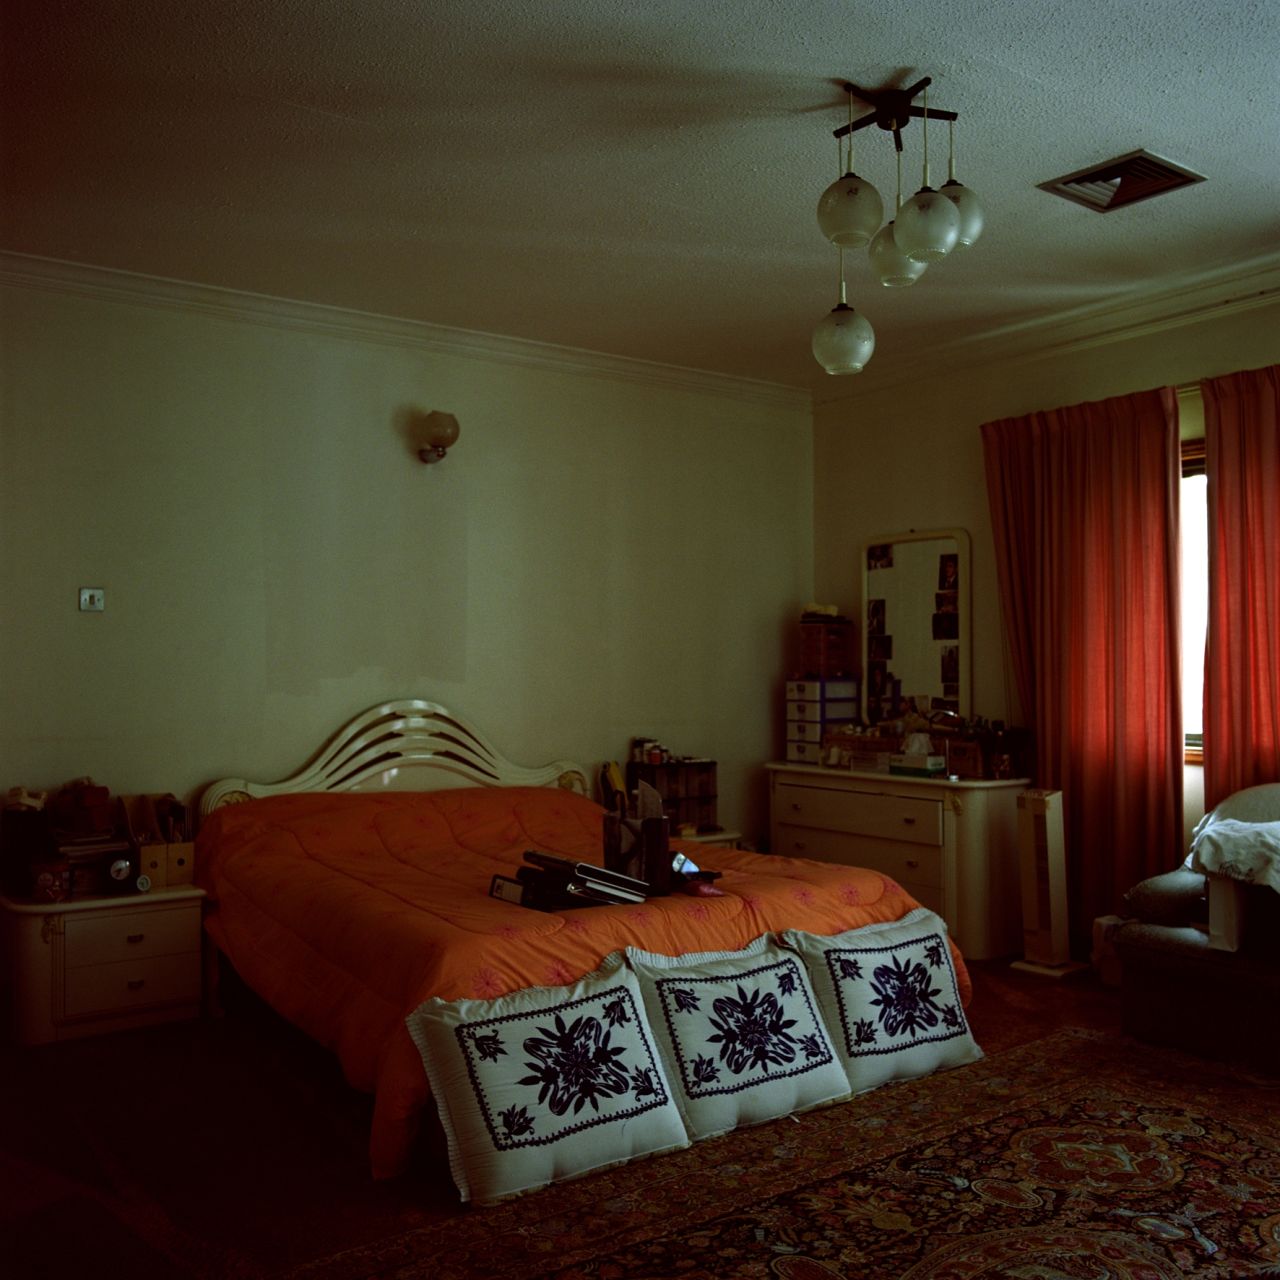 "The Orange Room" is from Lamya Gargash's "Presence Series." Her photographs document the forgotten public and private spaces of her native Emirati society.